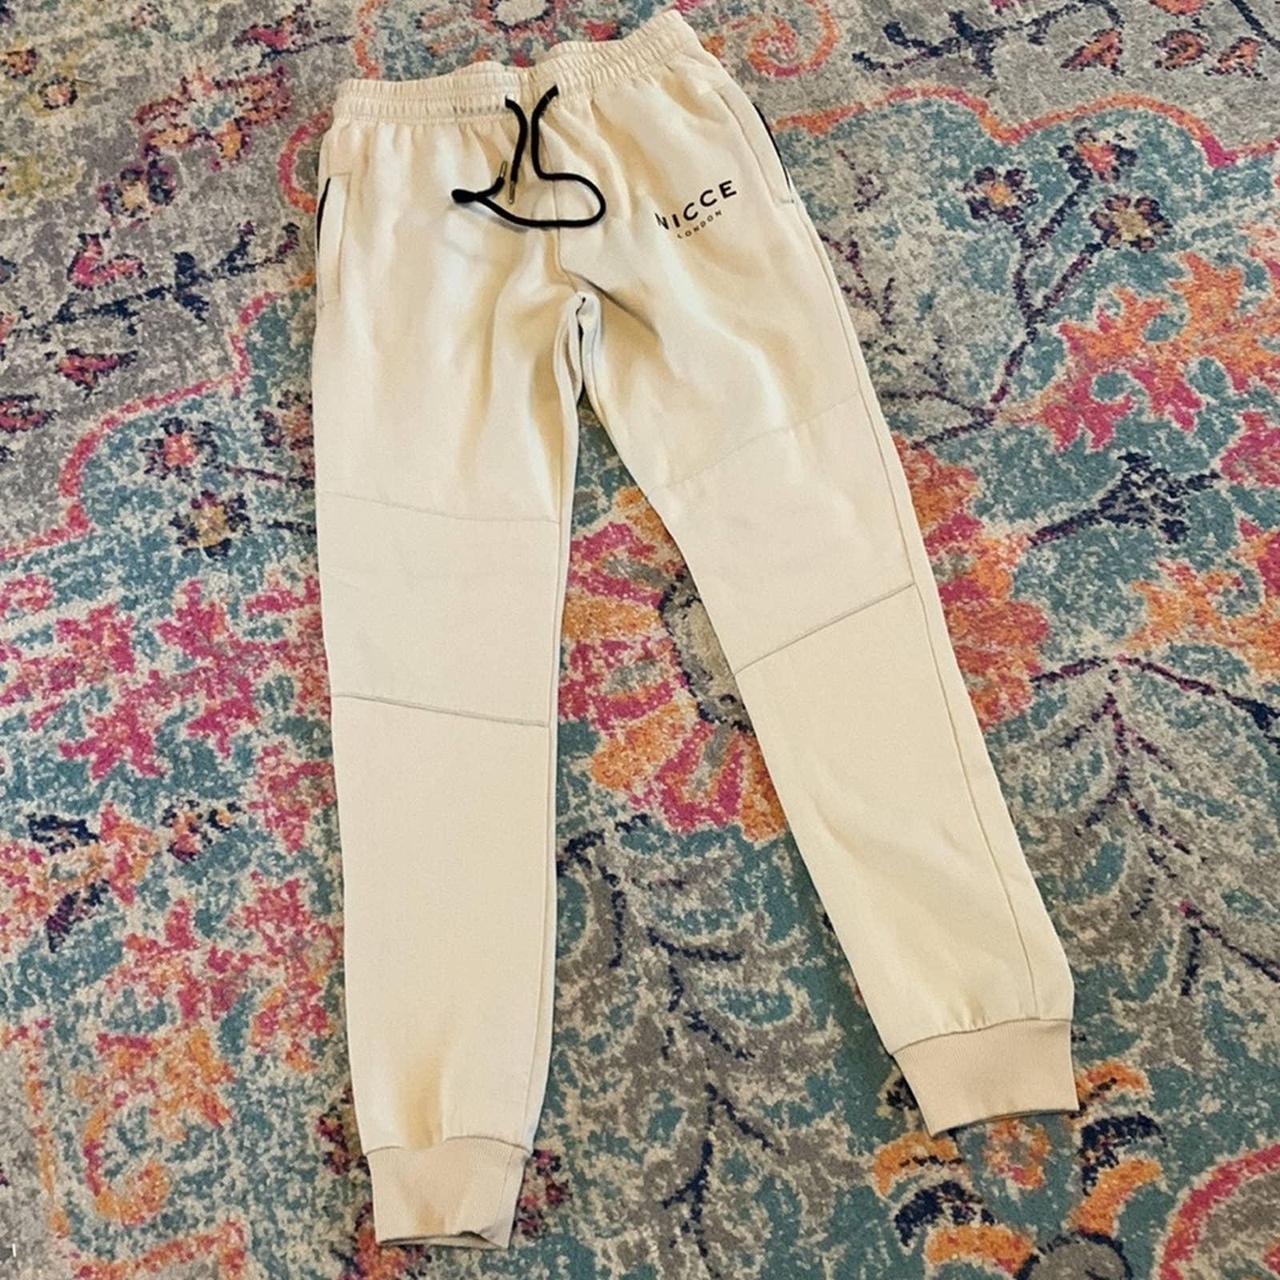 NICCE Women's Cream and Black Trousers